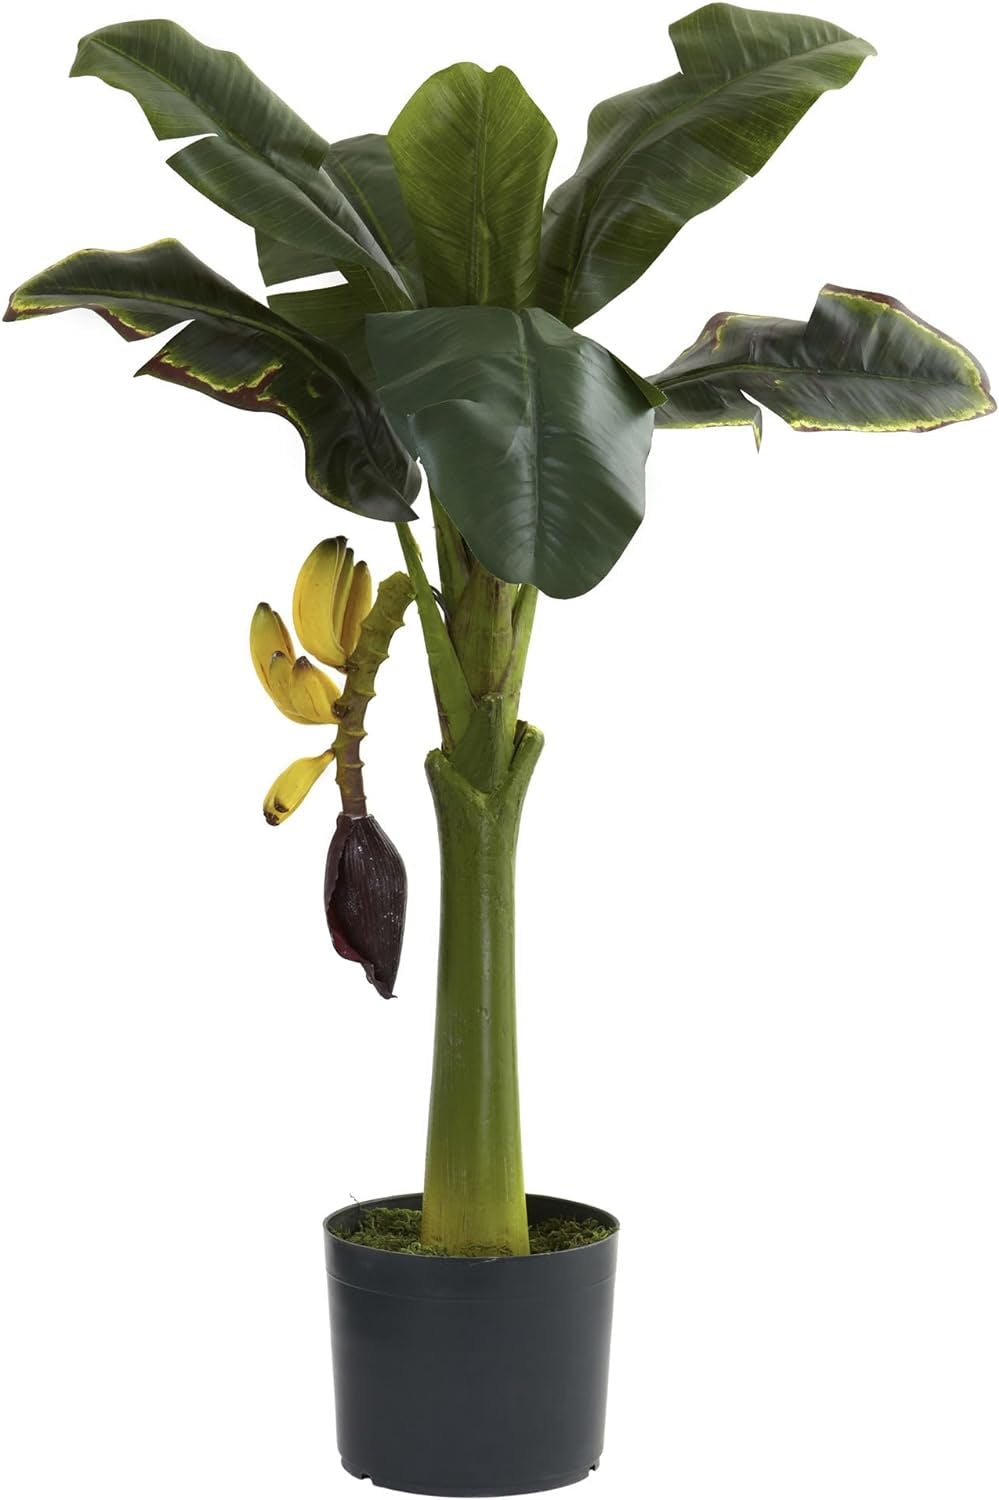 Lush Green 37" Faux Banana Tree in Silk and Plastic Pot